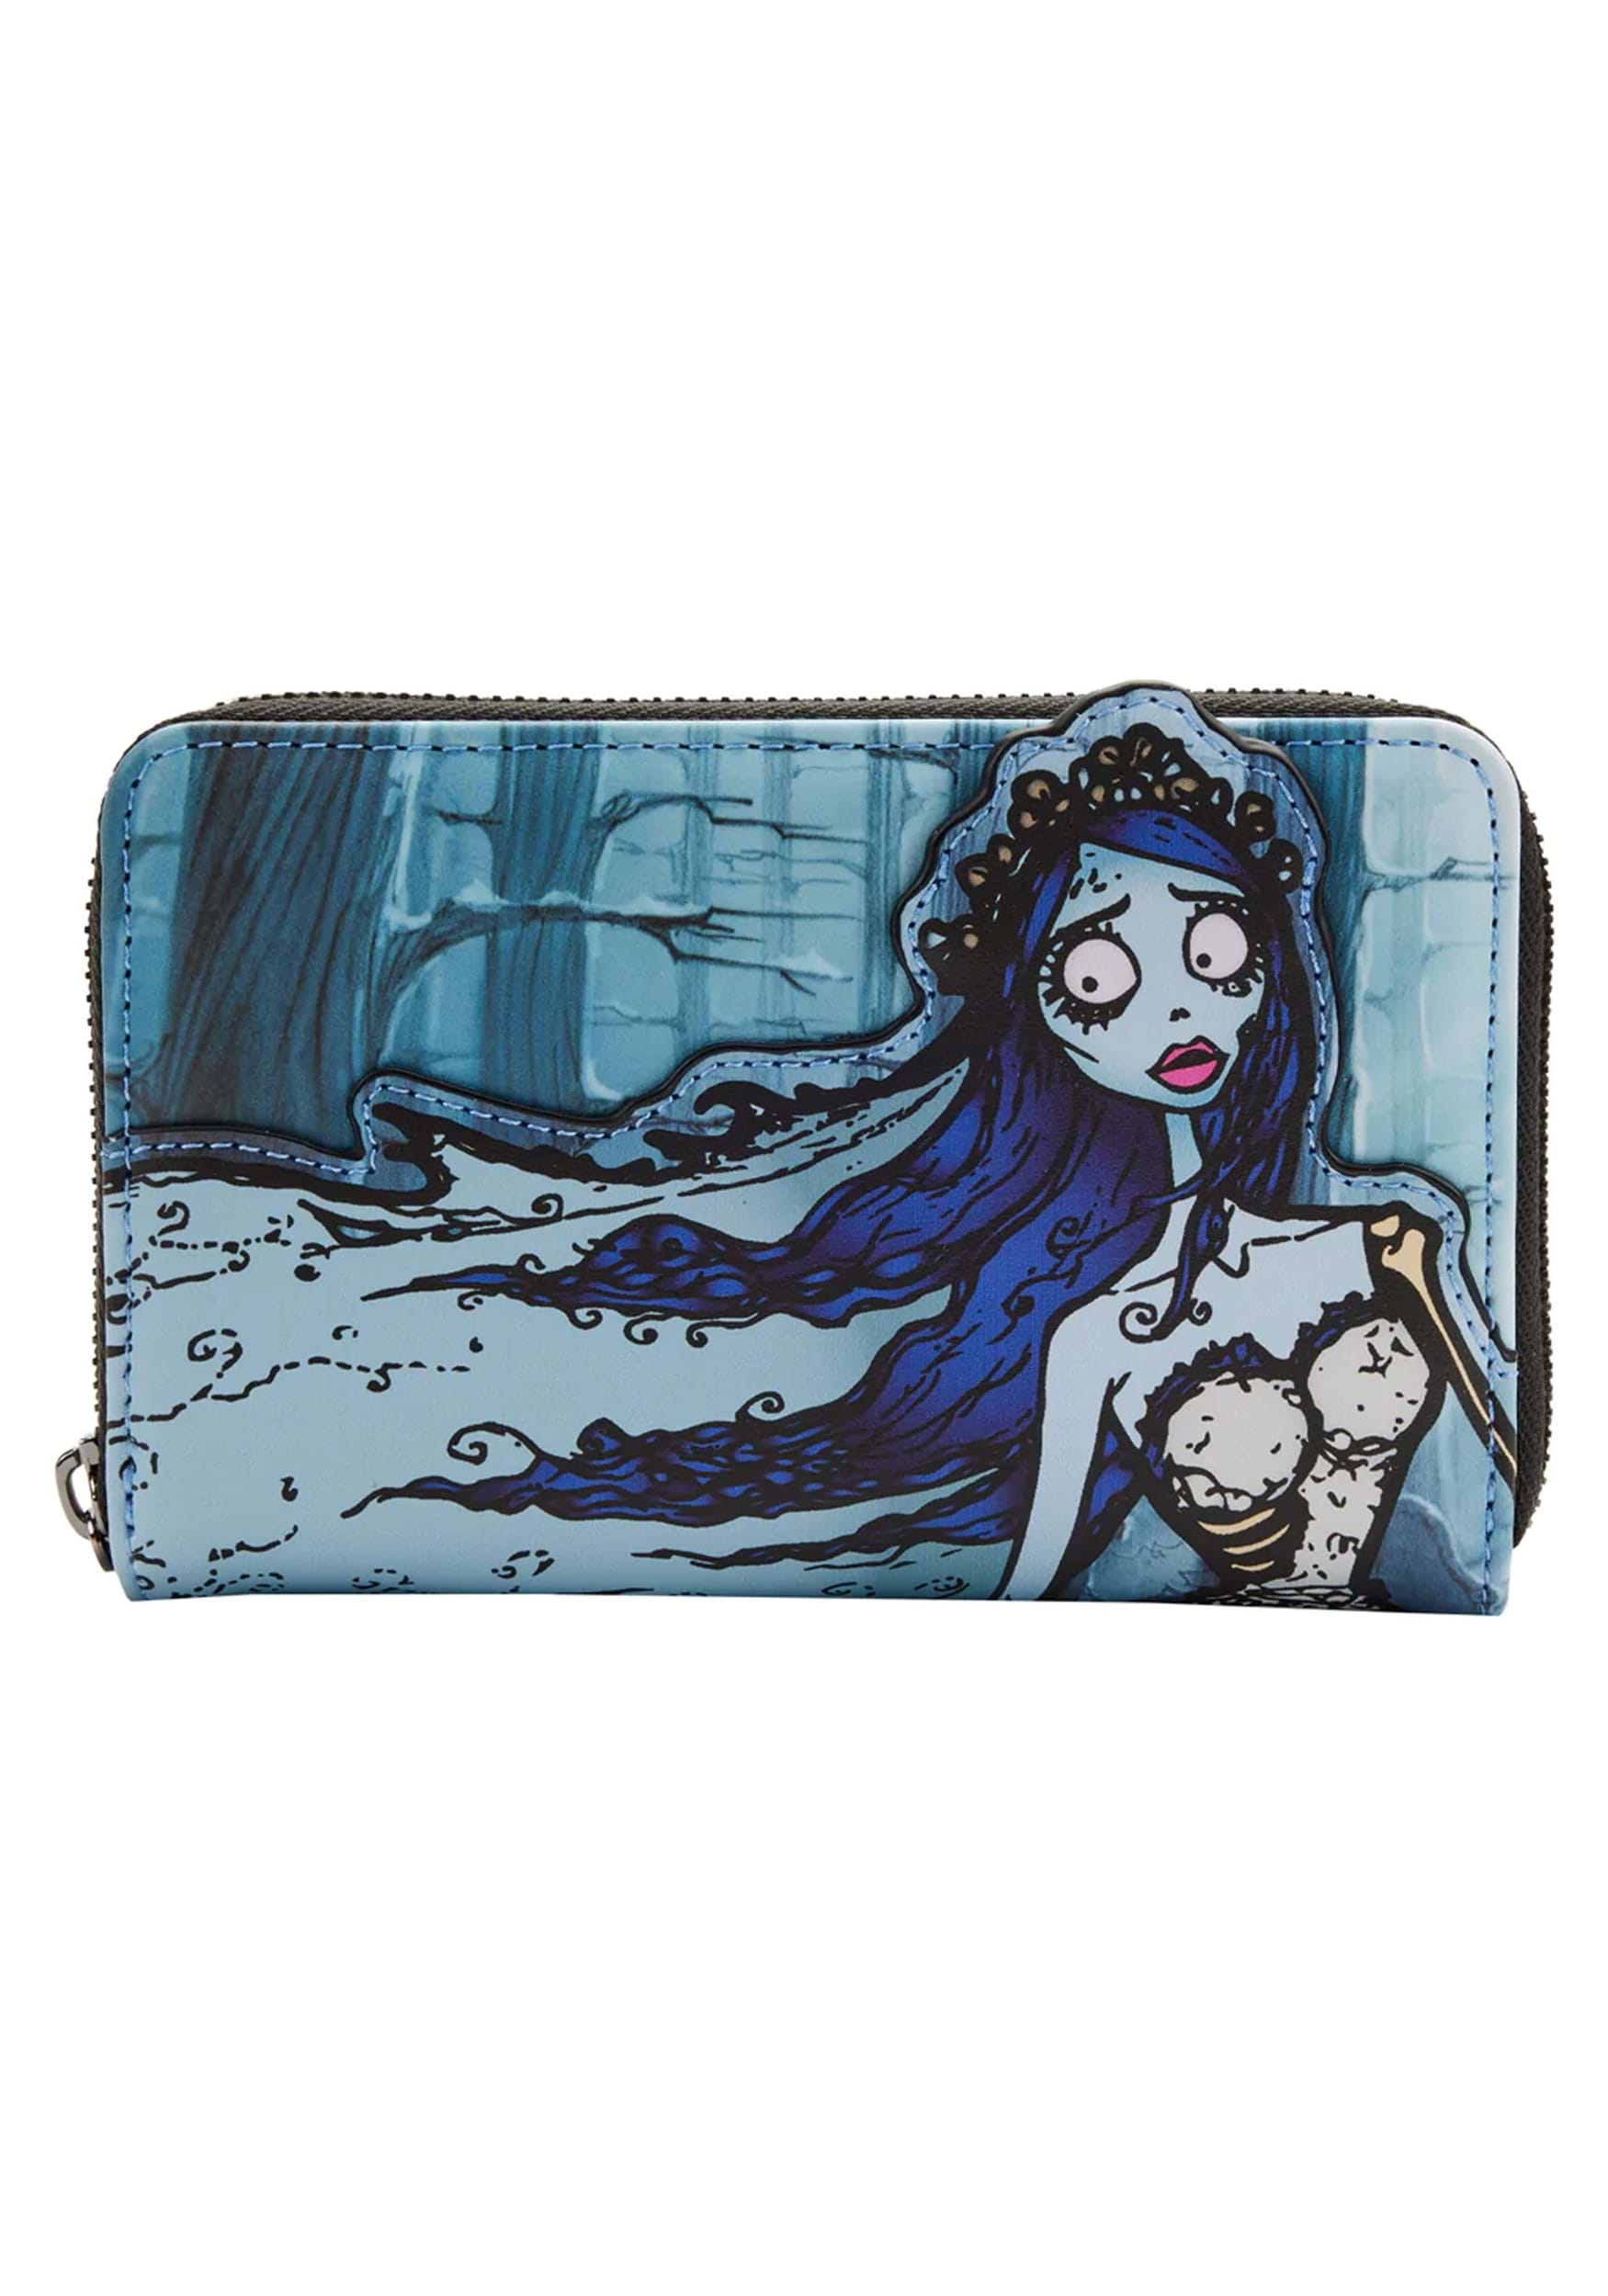 Corpse Bride Emily Forest Ziparound Wallet by Loungefly